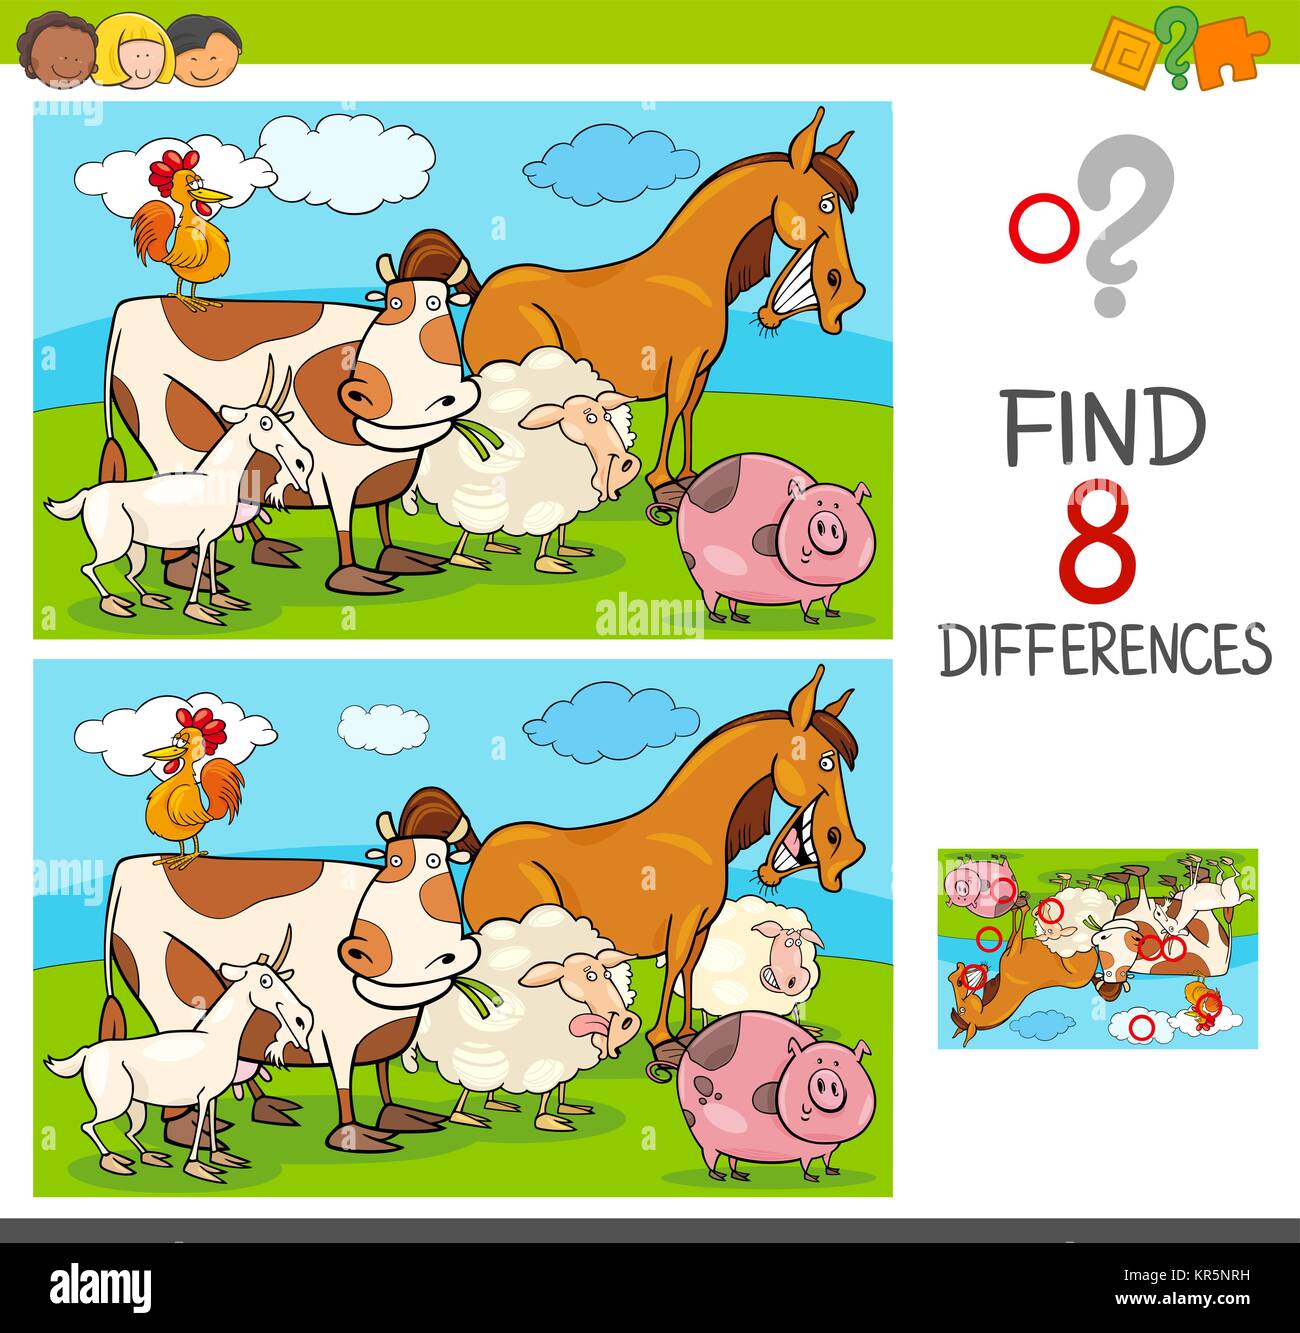 Cartoon Illustration of Finding Differences Between Two Pictures Educational Activity Game for Kids with Farm Animal Characters Group Stock Vector